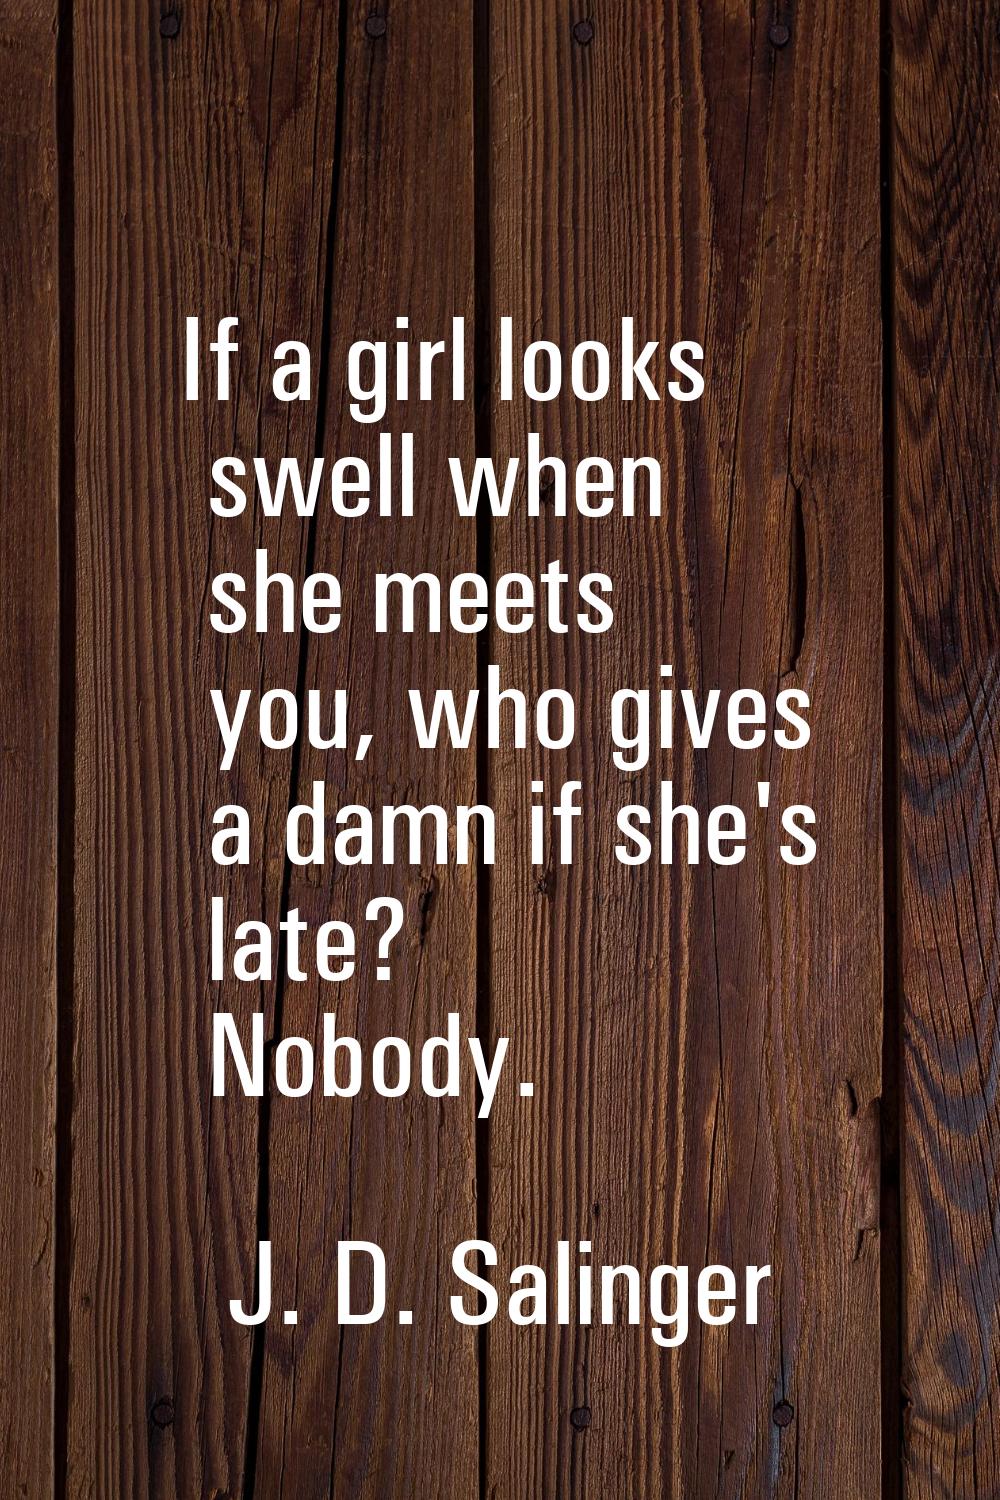 If a girl looks swell when she meets you, who gives a damn if she's late? Nobody.